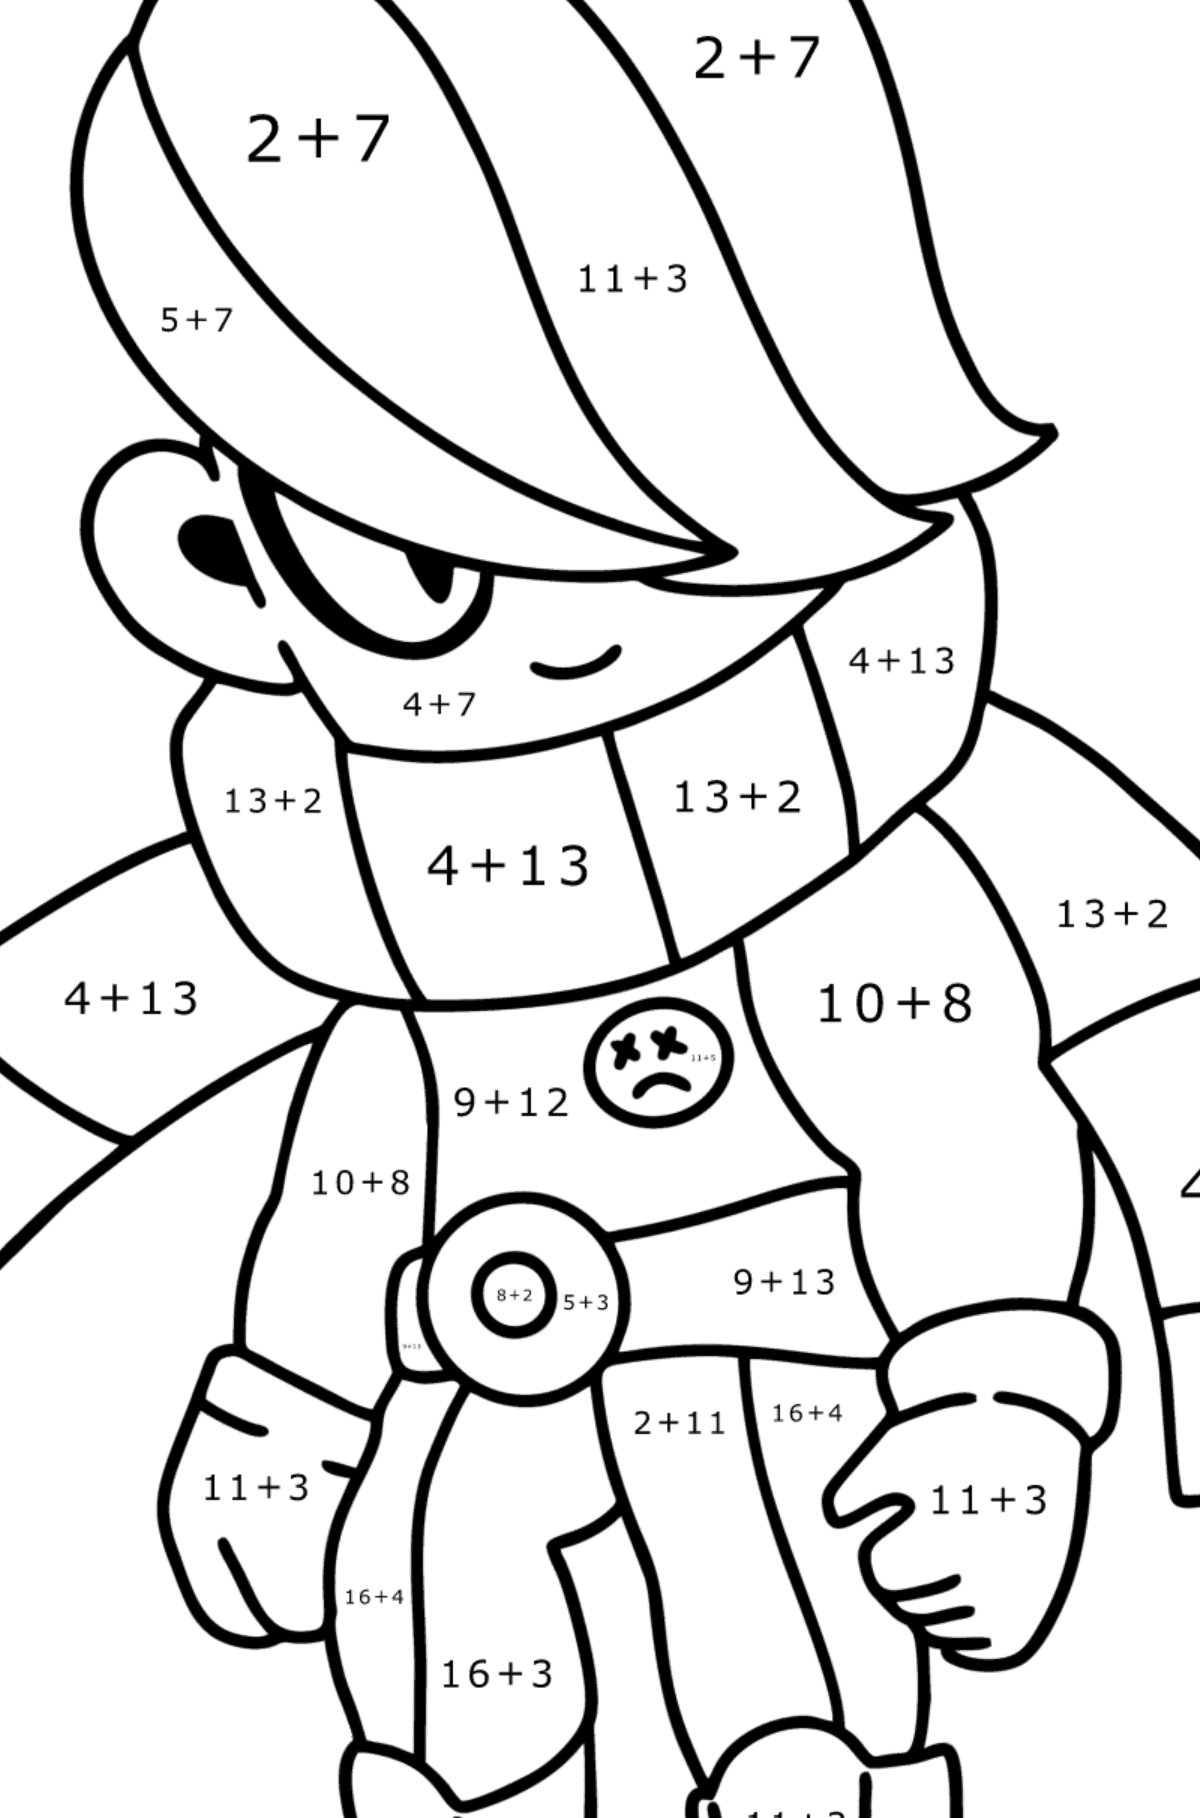 Brawl Stars Edgar coloring page - Math Coloring - Addition for Kids